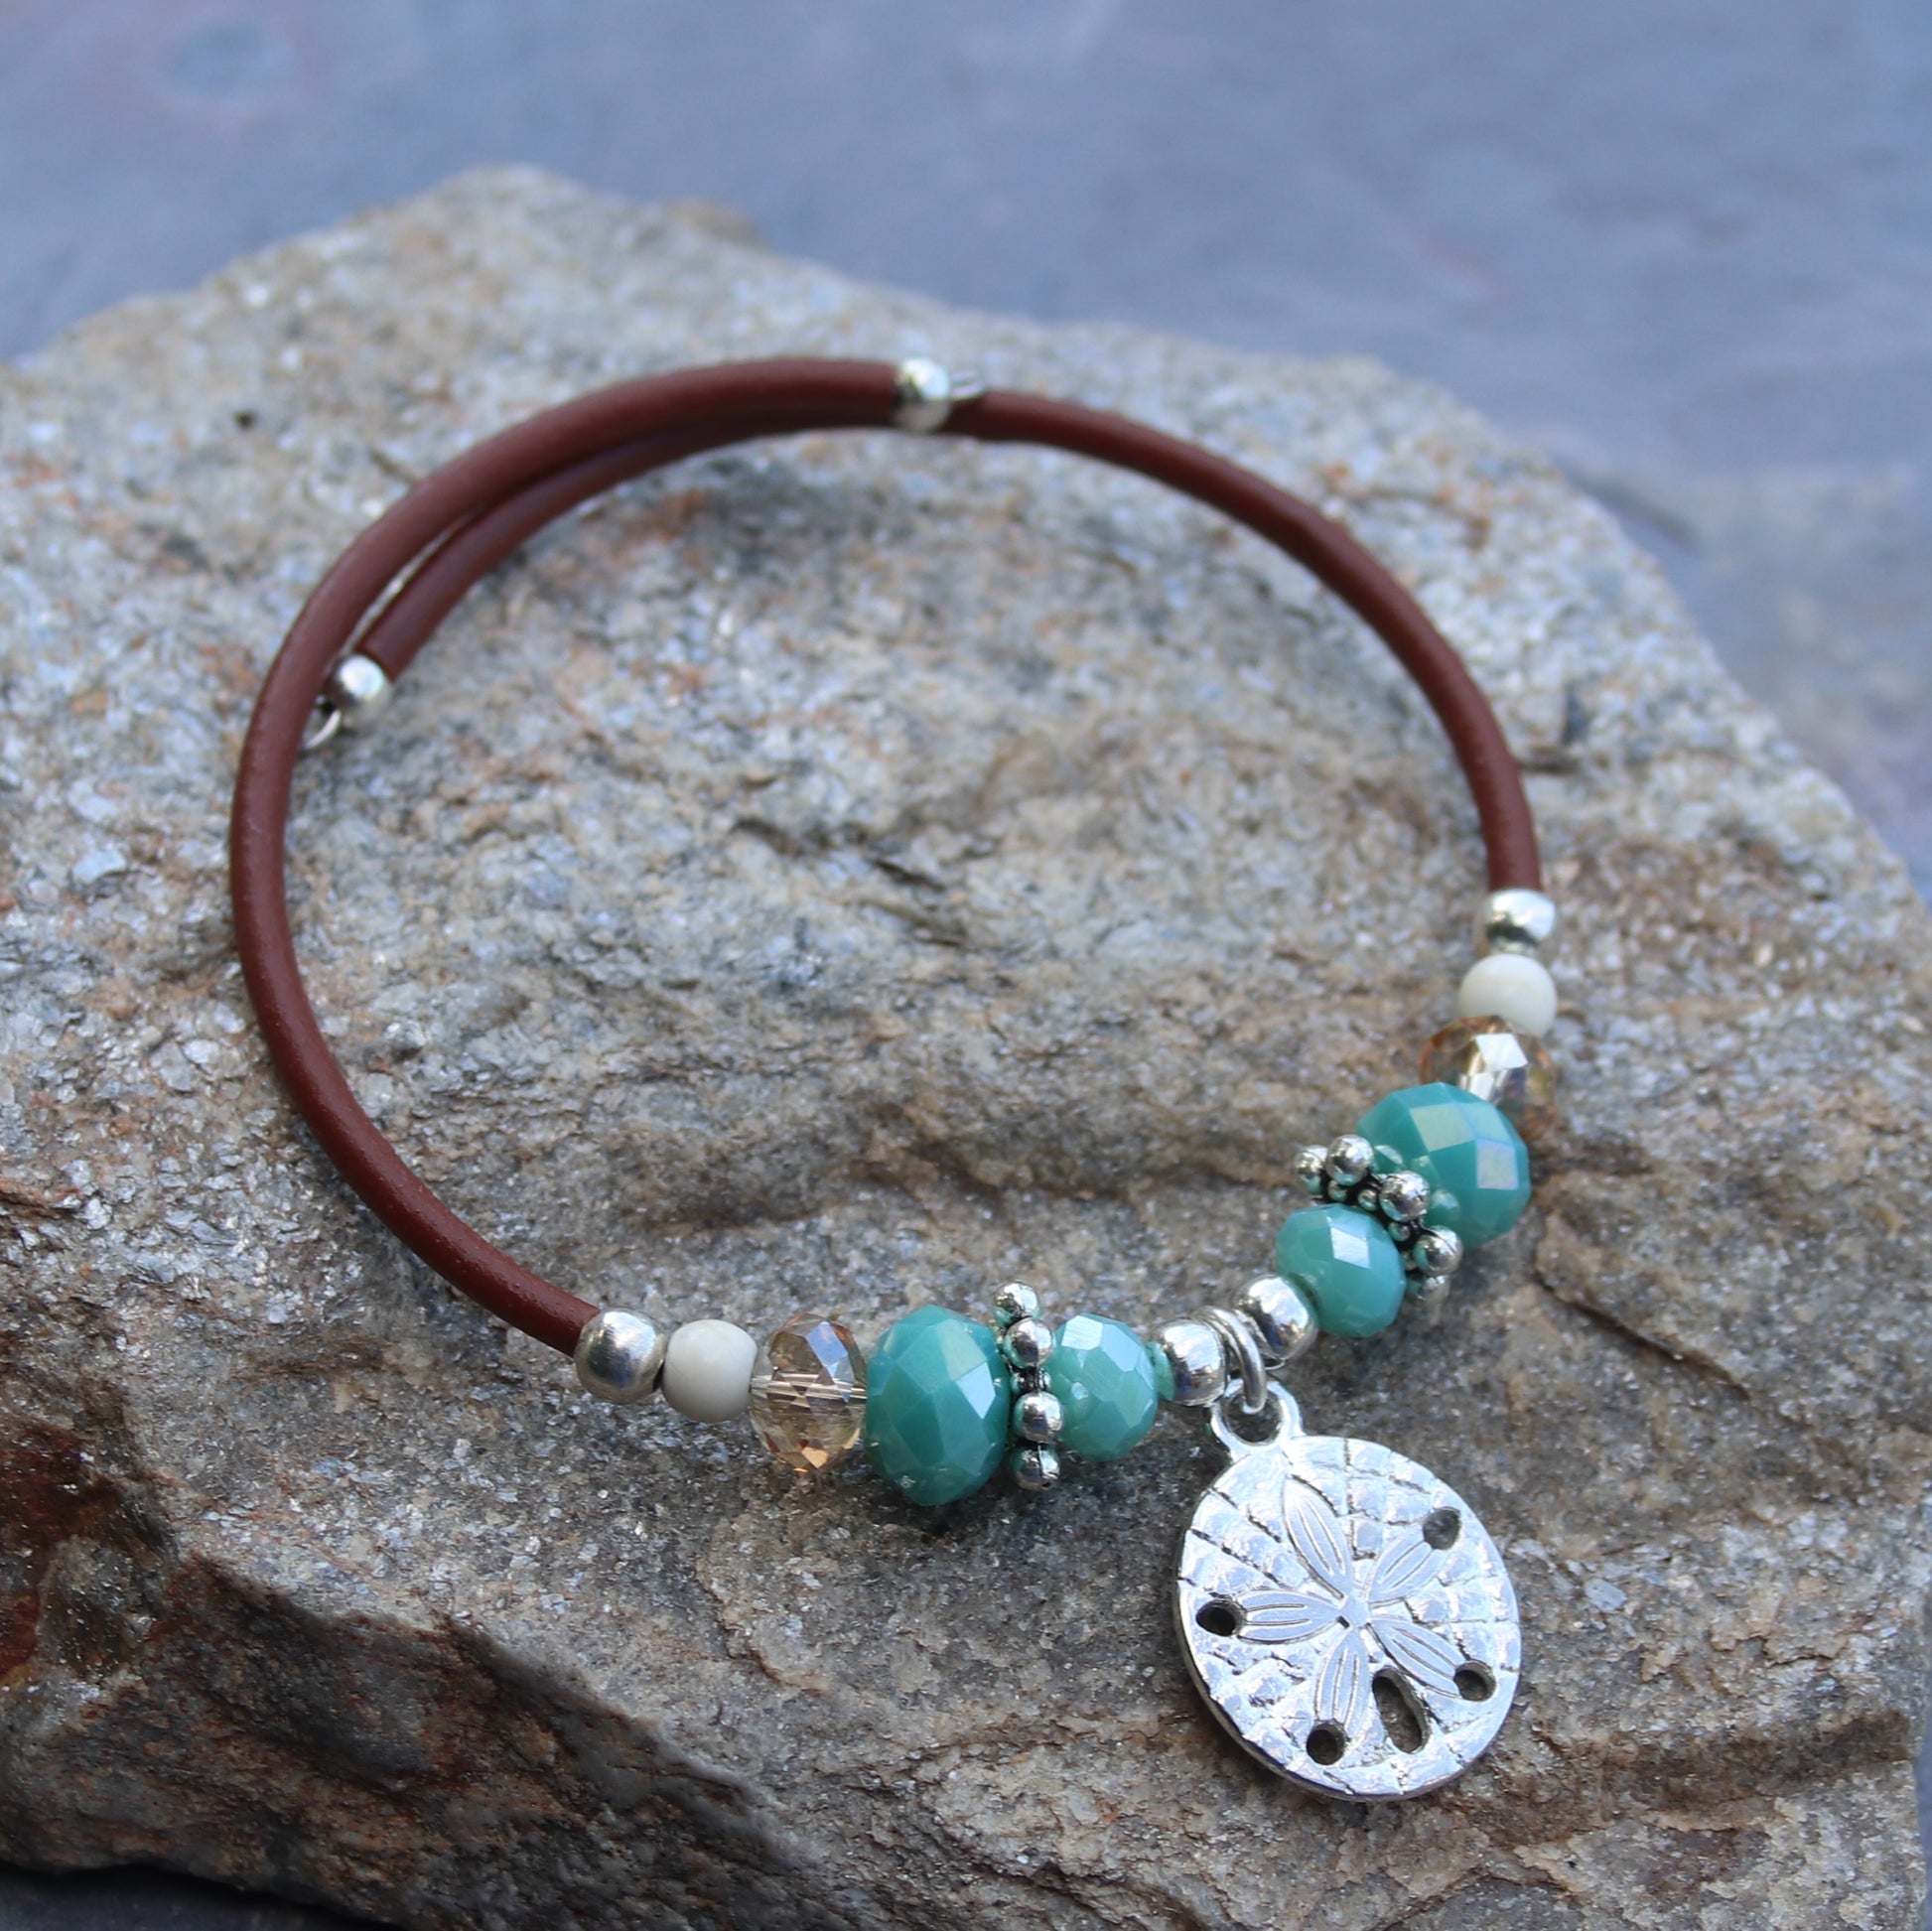 Wrap Bracelet - sand dollar pewter charm with mix aqua and sandy colored beads